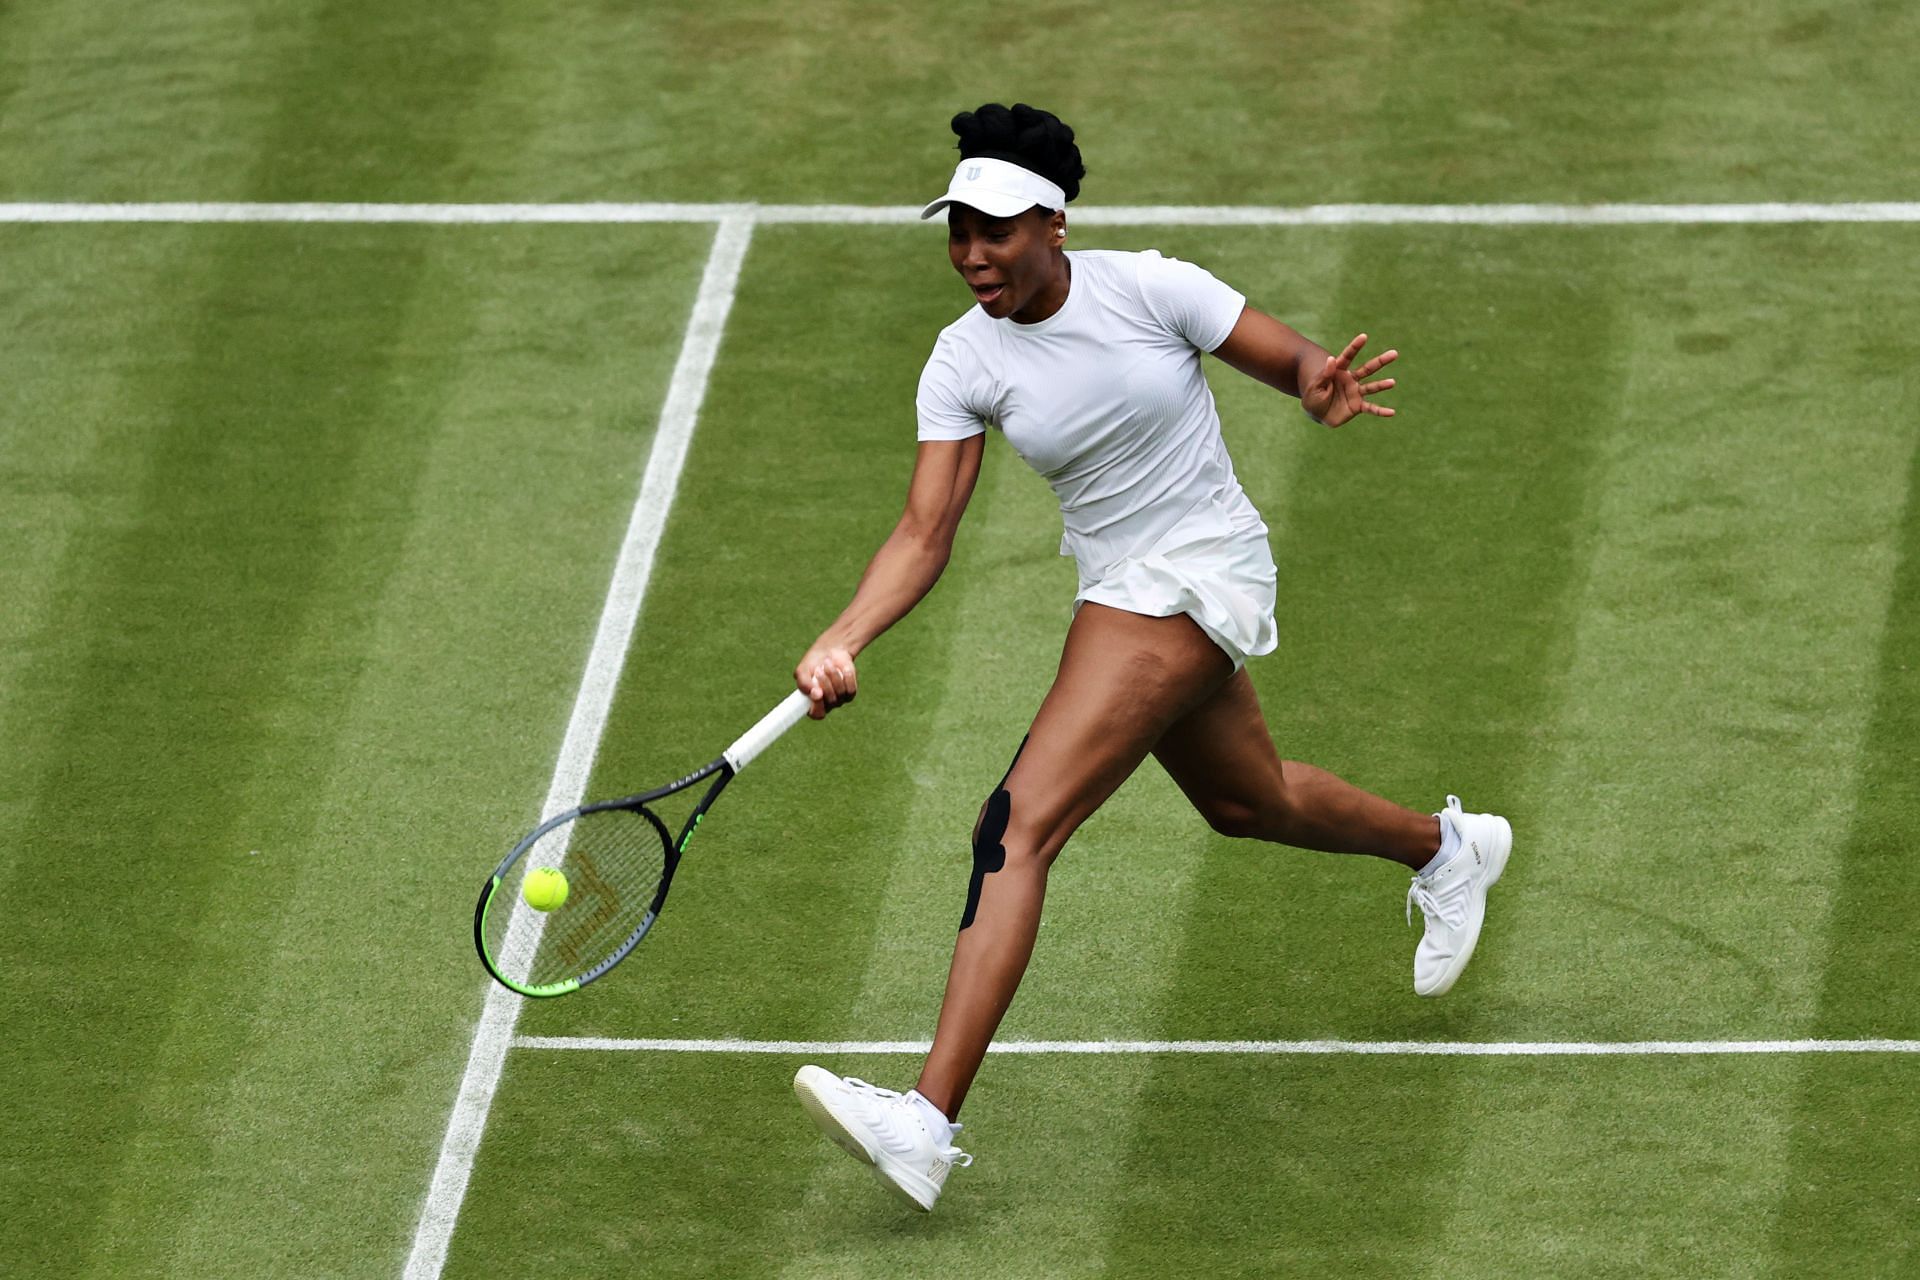 Venus Williams in action at the 2021 Wimbledon Championships.